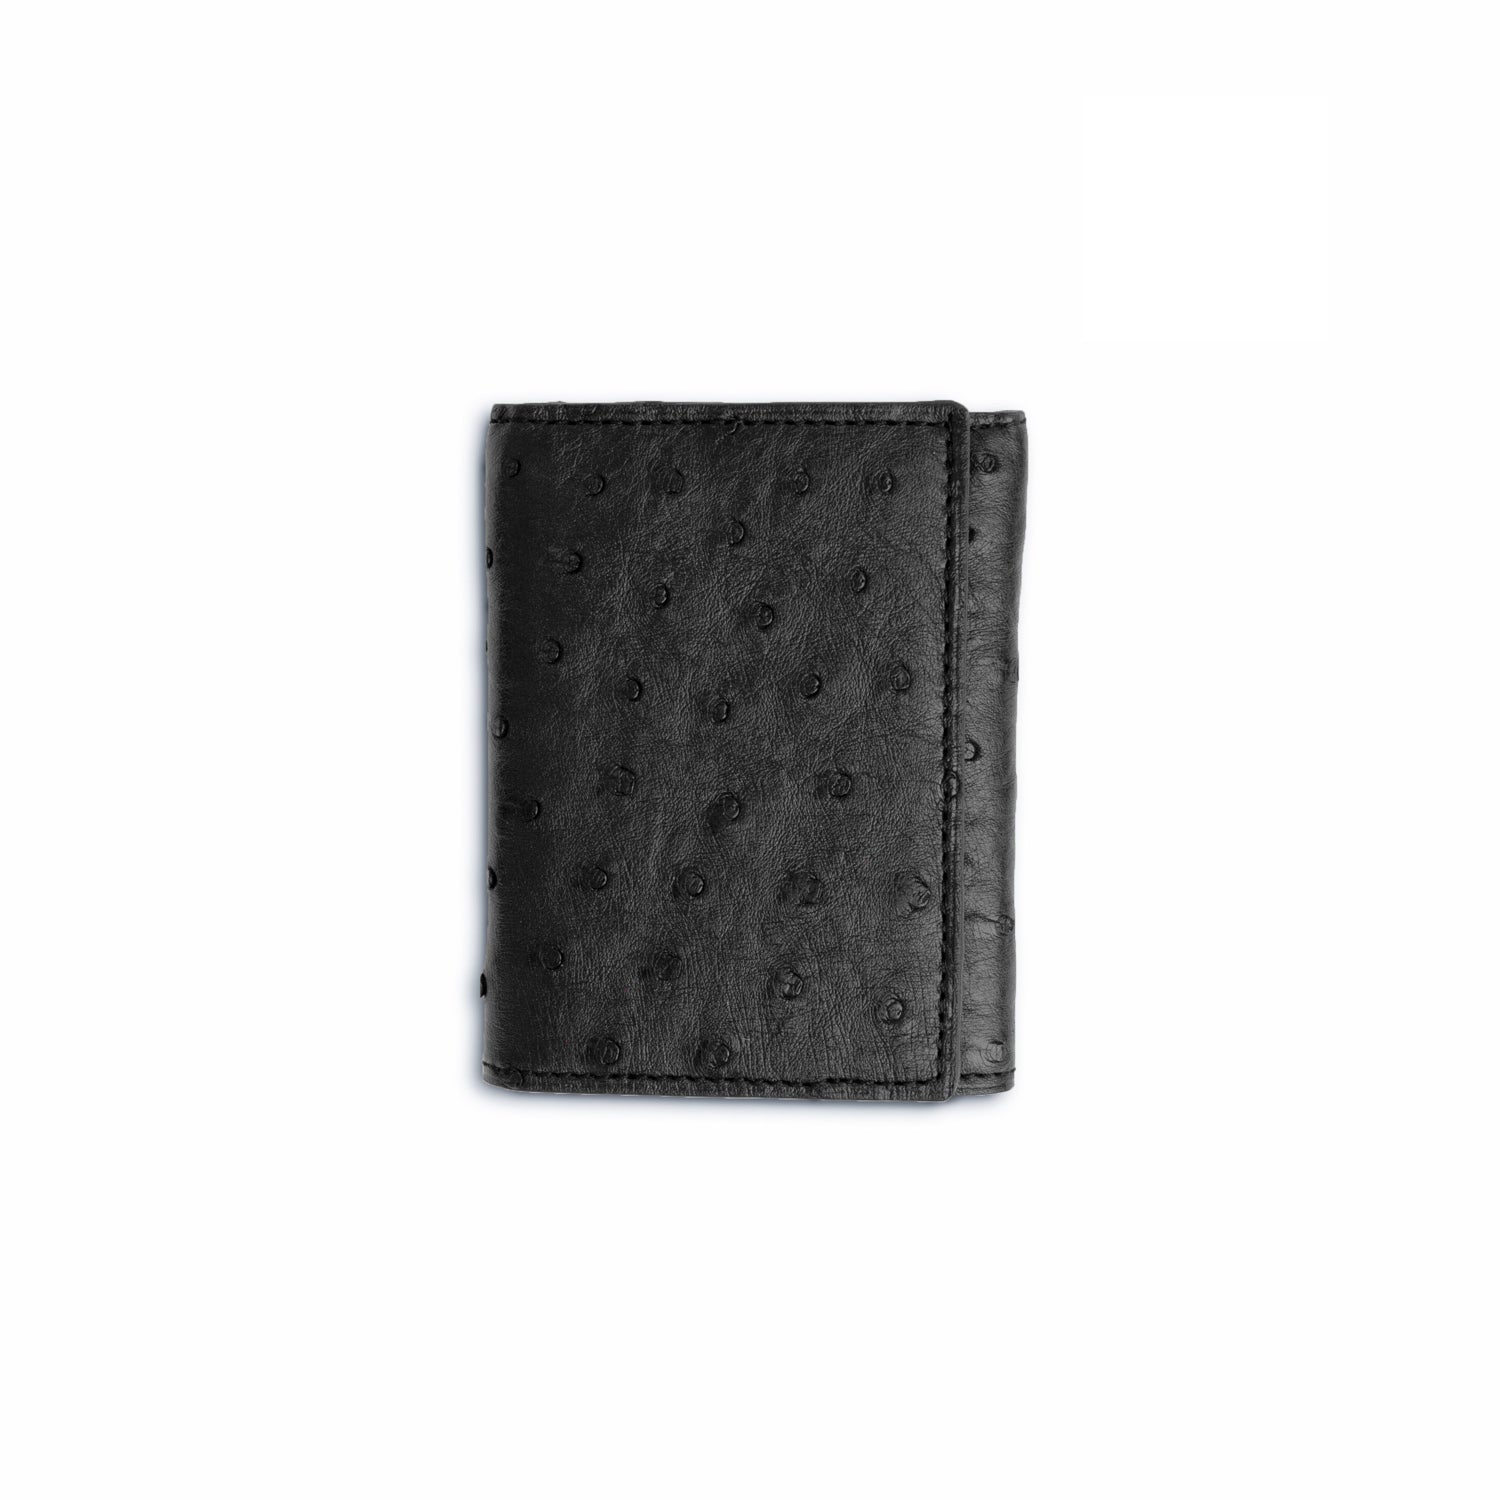 Ostrich Wallet Real Ostrich Leather Wallet Ostrich Quill 